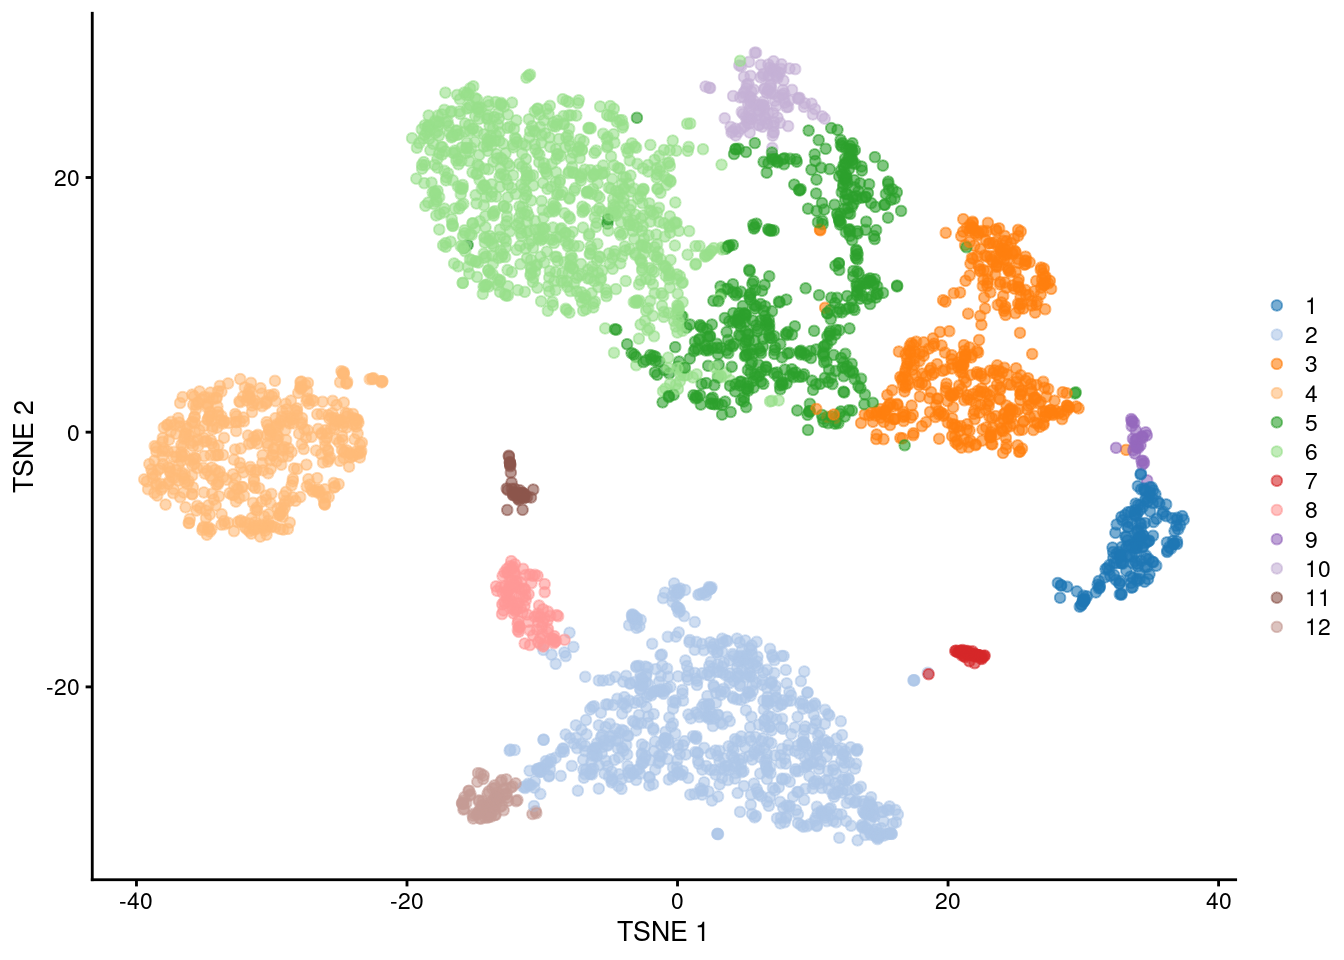 $t$-SNE plot of the PBMC dataset, where each point represents a cell and is coloured according to the identity of the assigned cluster from combined $k$-means/graph-based clustering.